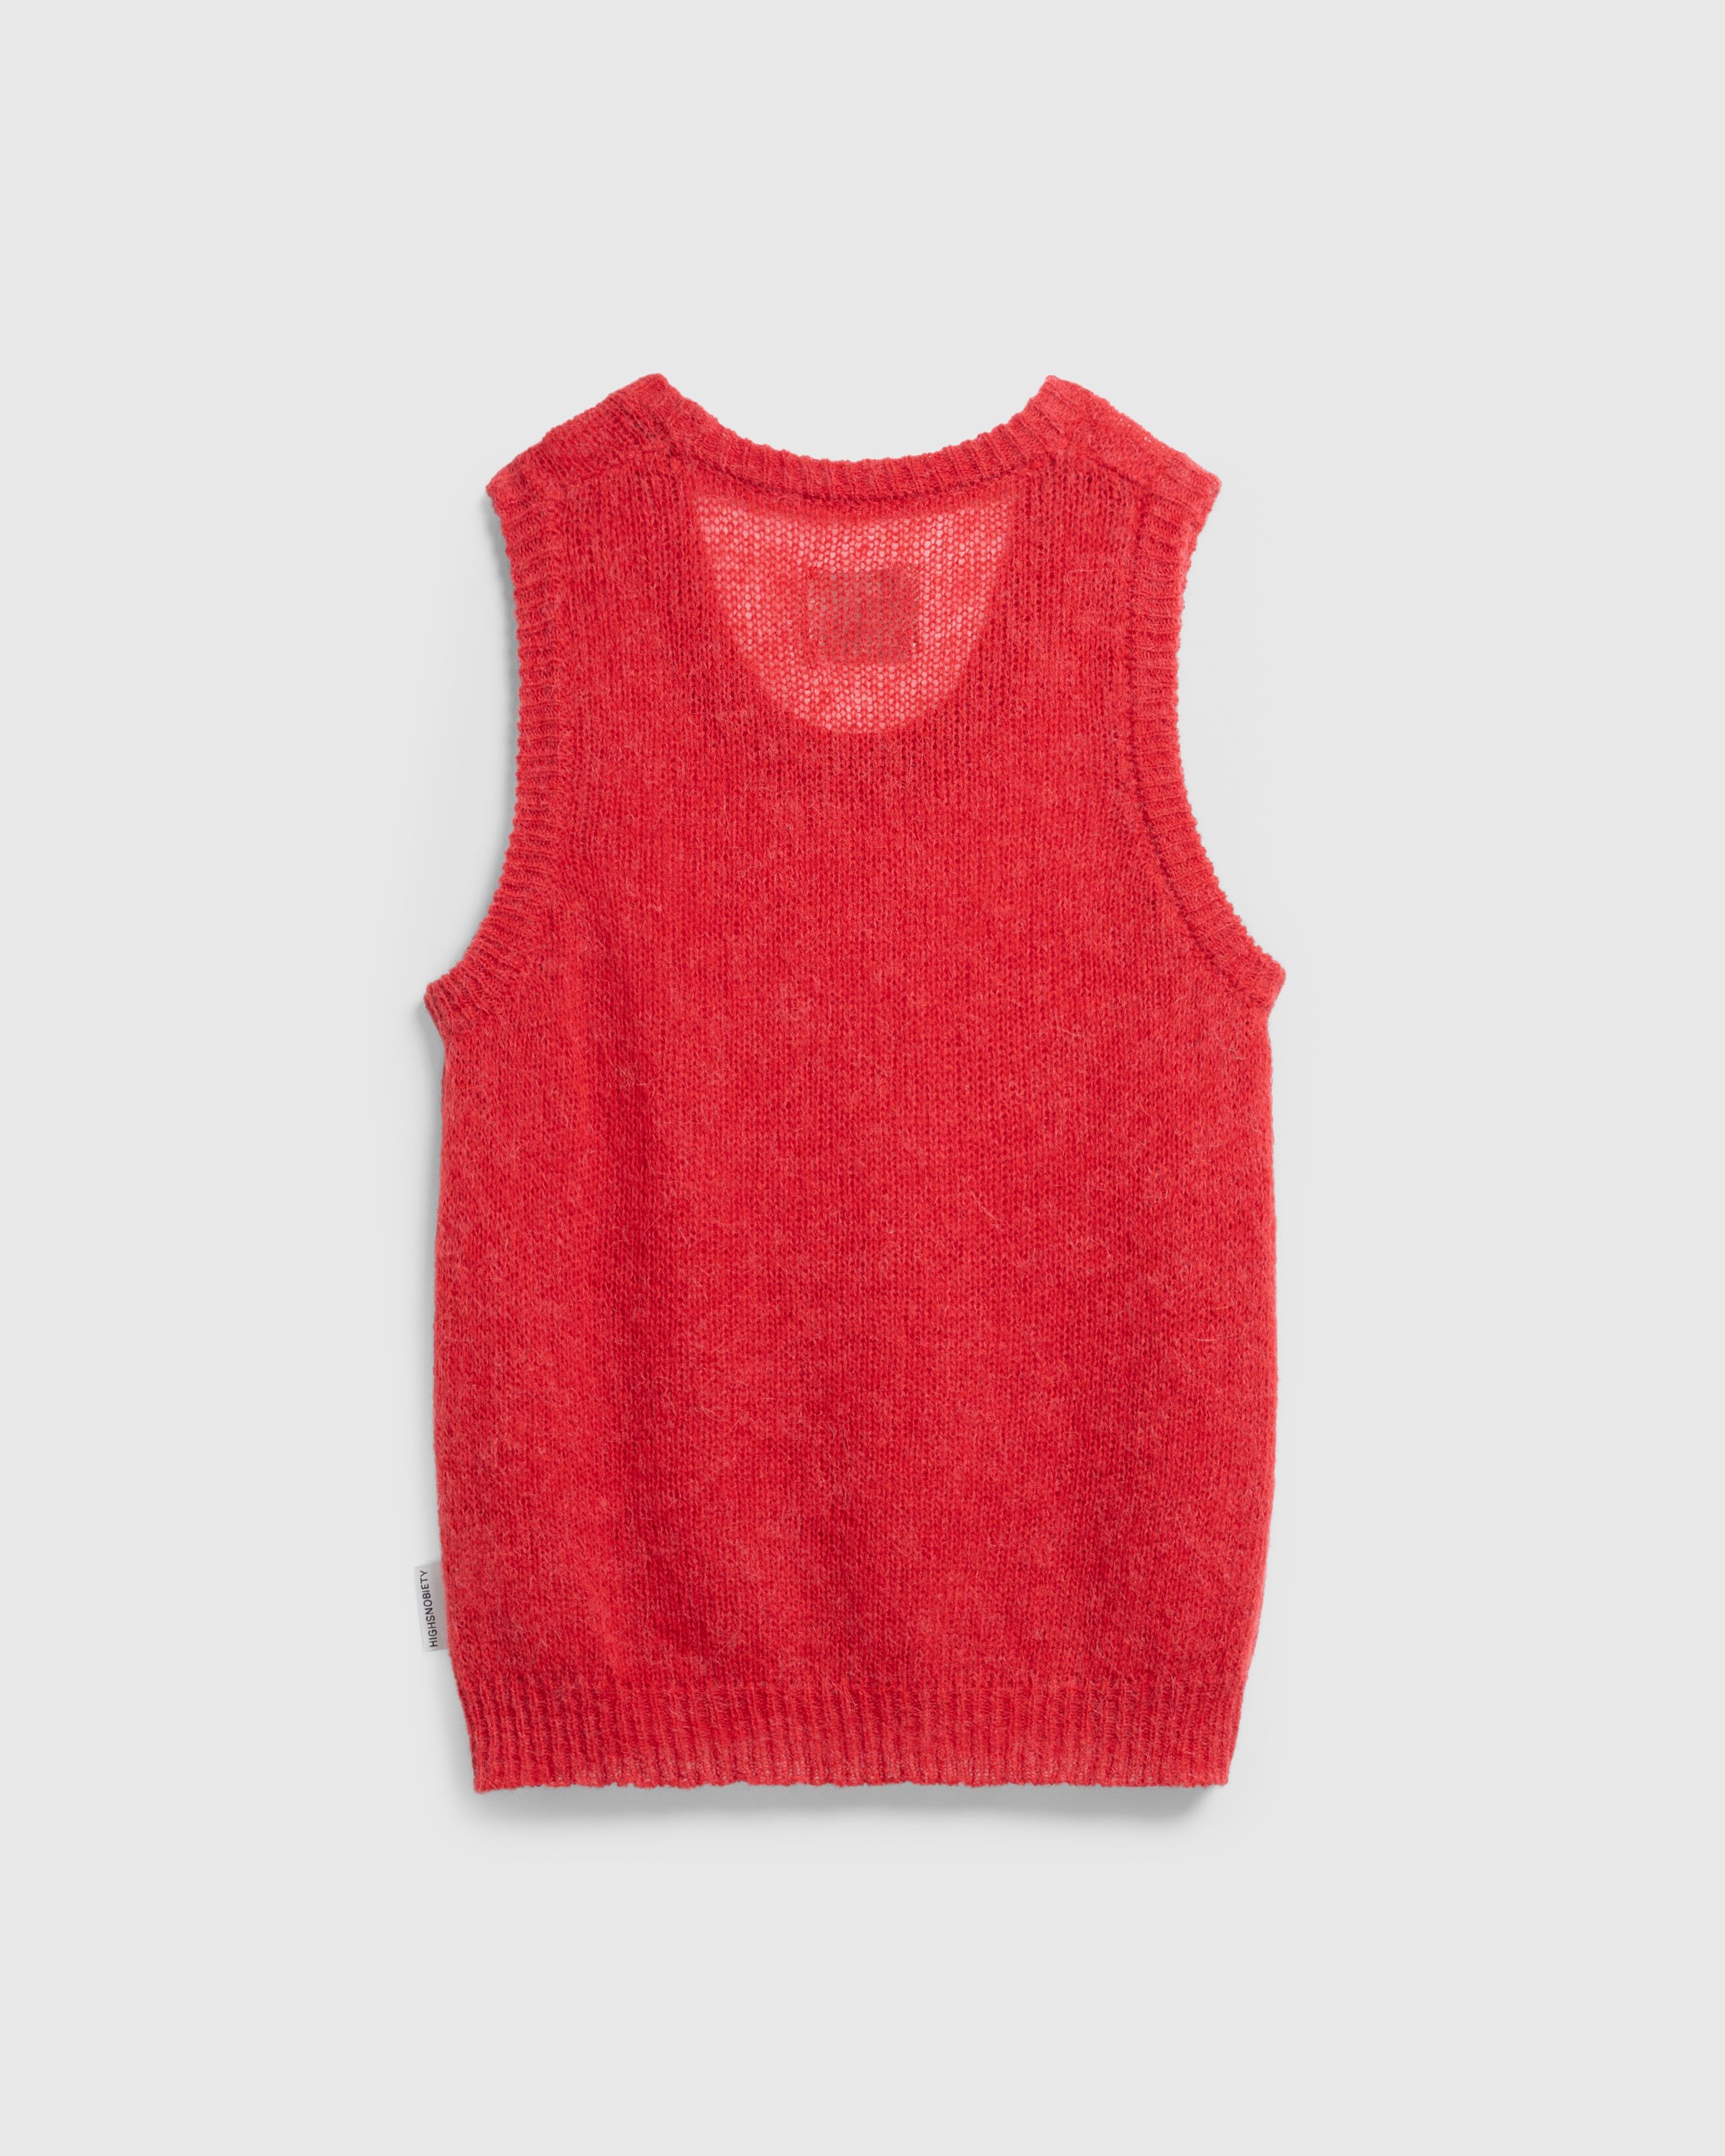 Highsnobiety HS05 - Loose Gage Tank Top Red - Clothing - Red - Image 2